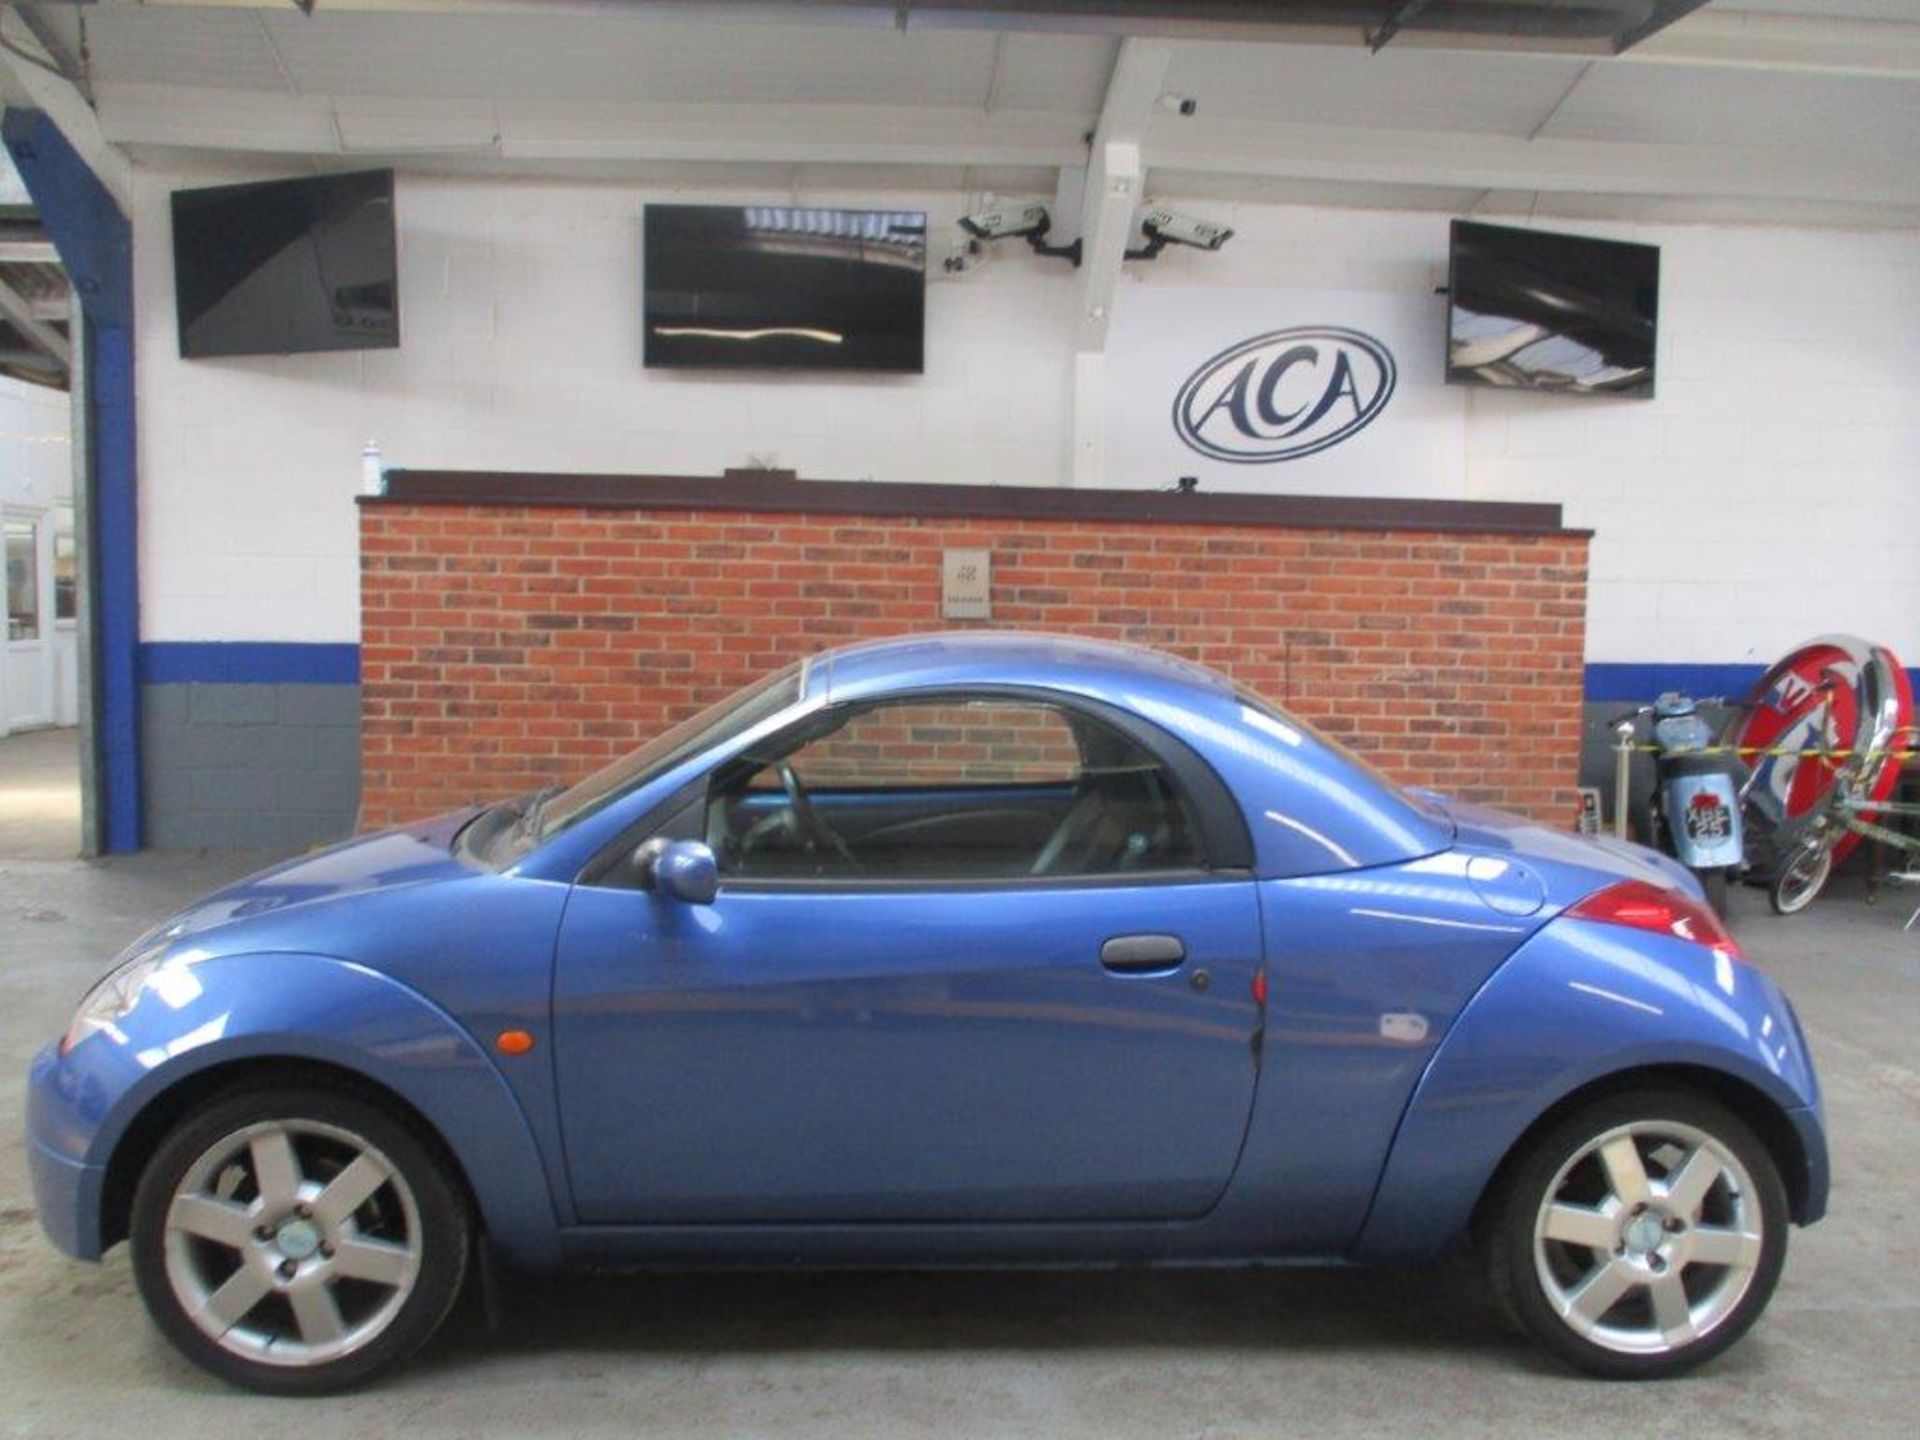 06 06 Ford Streetka Winter - Image 2 of 17